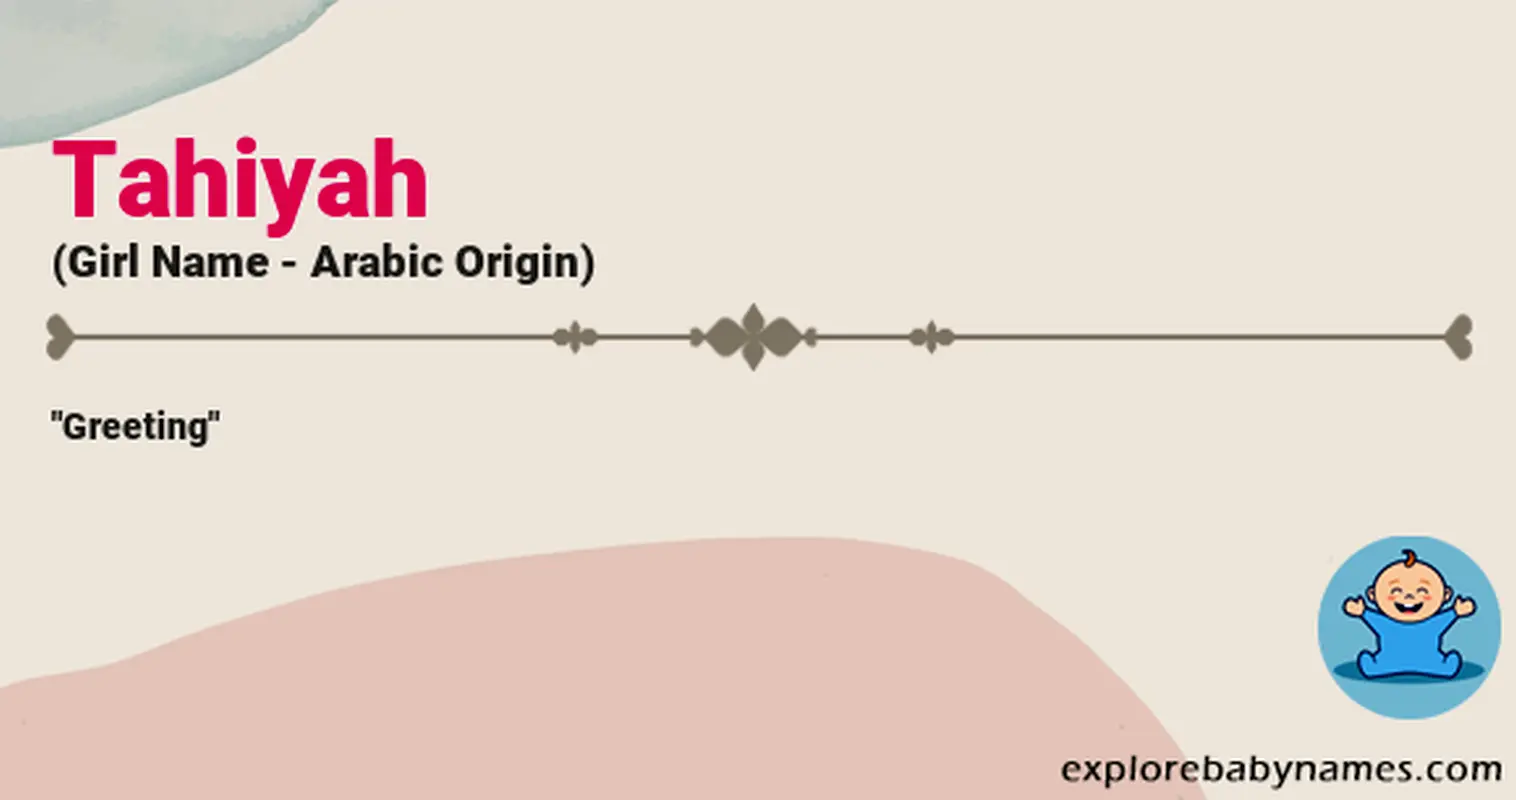 Meaning of Tahiyah